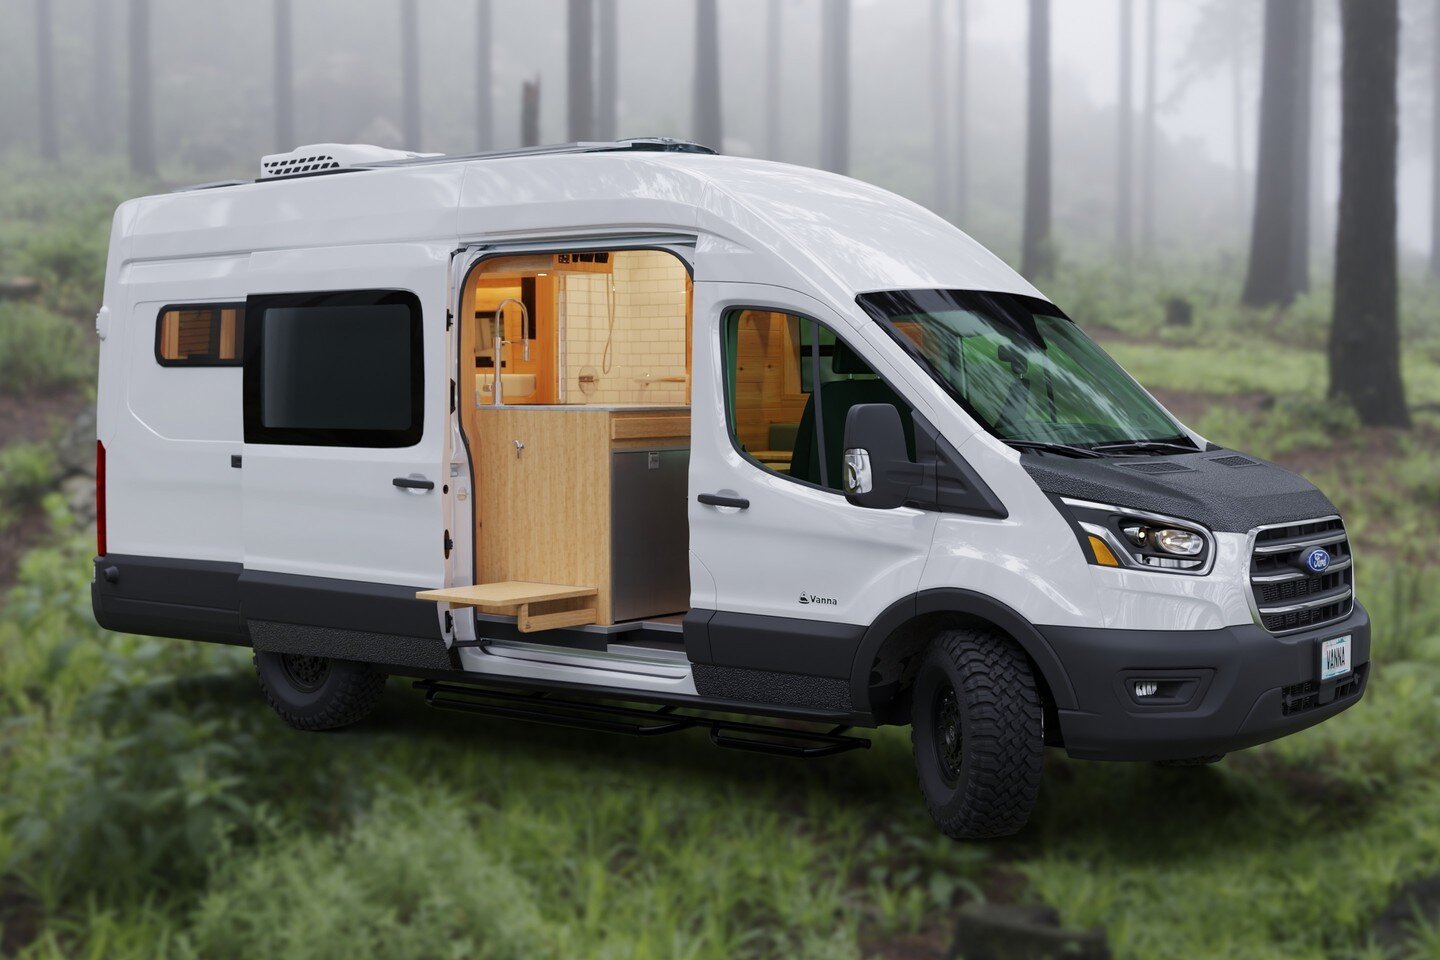 🚨VAN FOR SALE 🚨 

Brand-new custom-built 2023 Ford Transit in production by Vanna Adventure Vans. This MK2 is designed for passionate travelers who crave off-grid adventures on their own terms. Due to the van being currently built, we have displaye